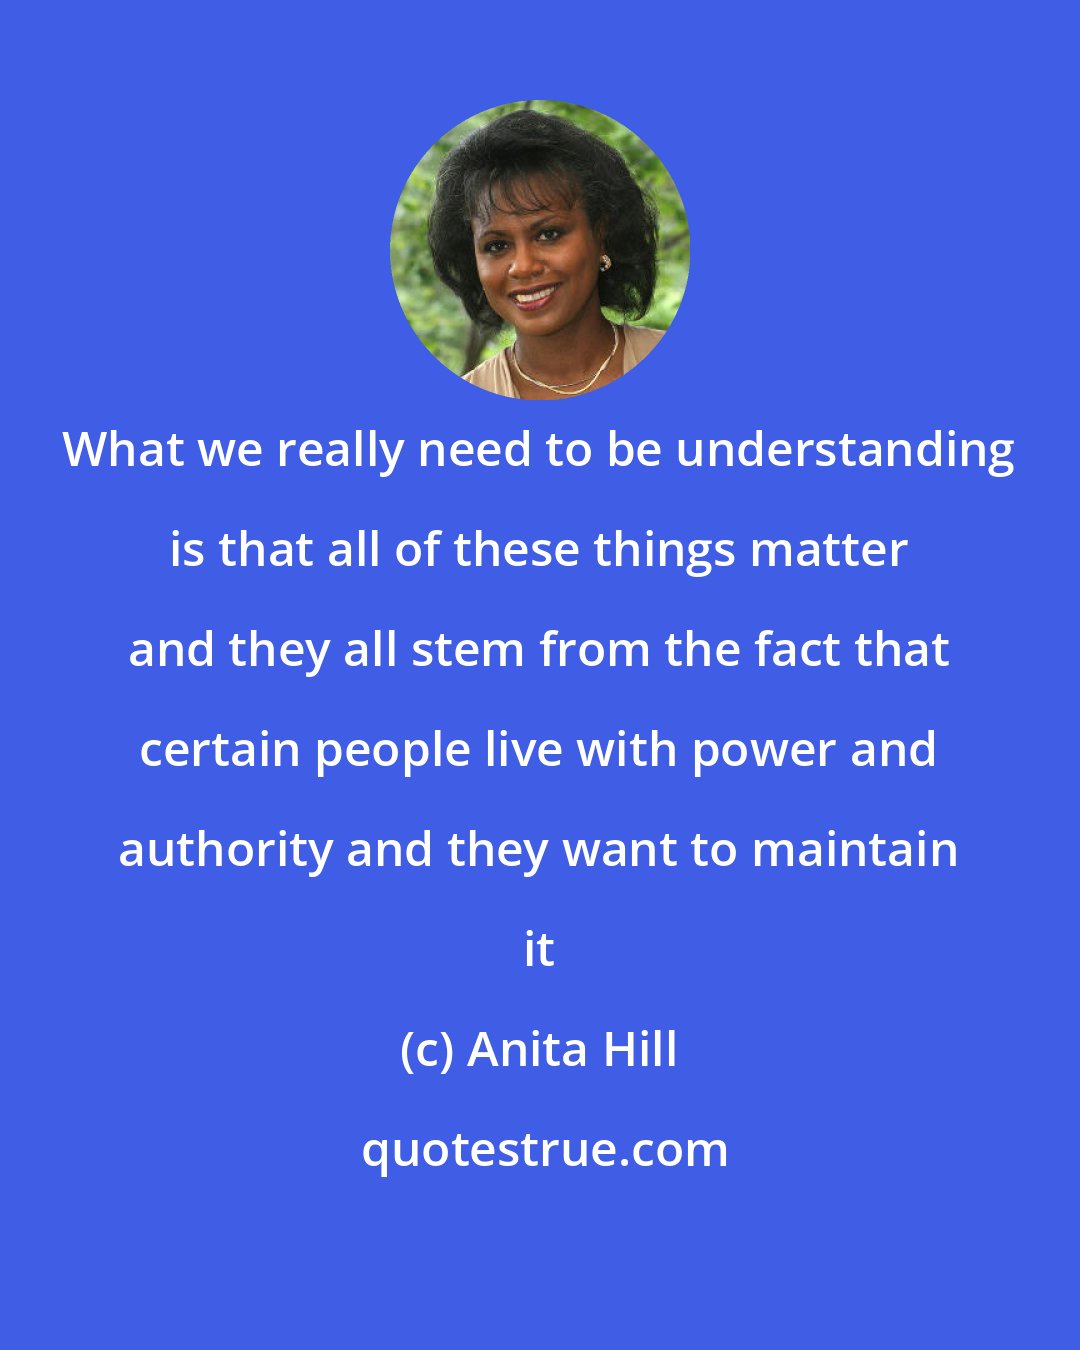 Anita Hill: What we really need to be understanding is that all of these things matter and they all stem from the fact that certain people live with power and authority and they want to maintain it